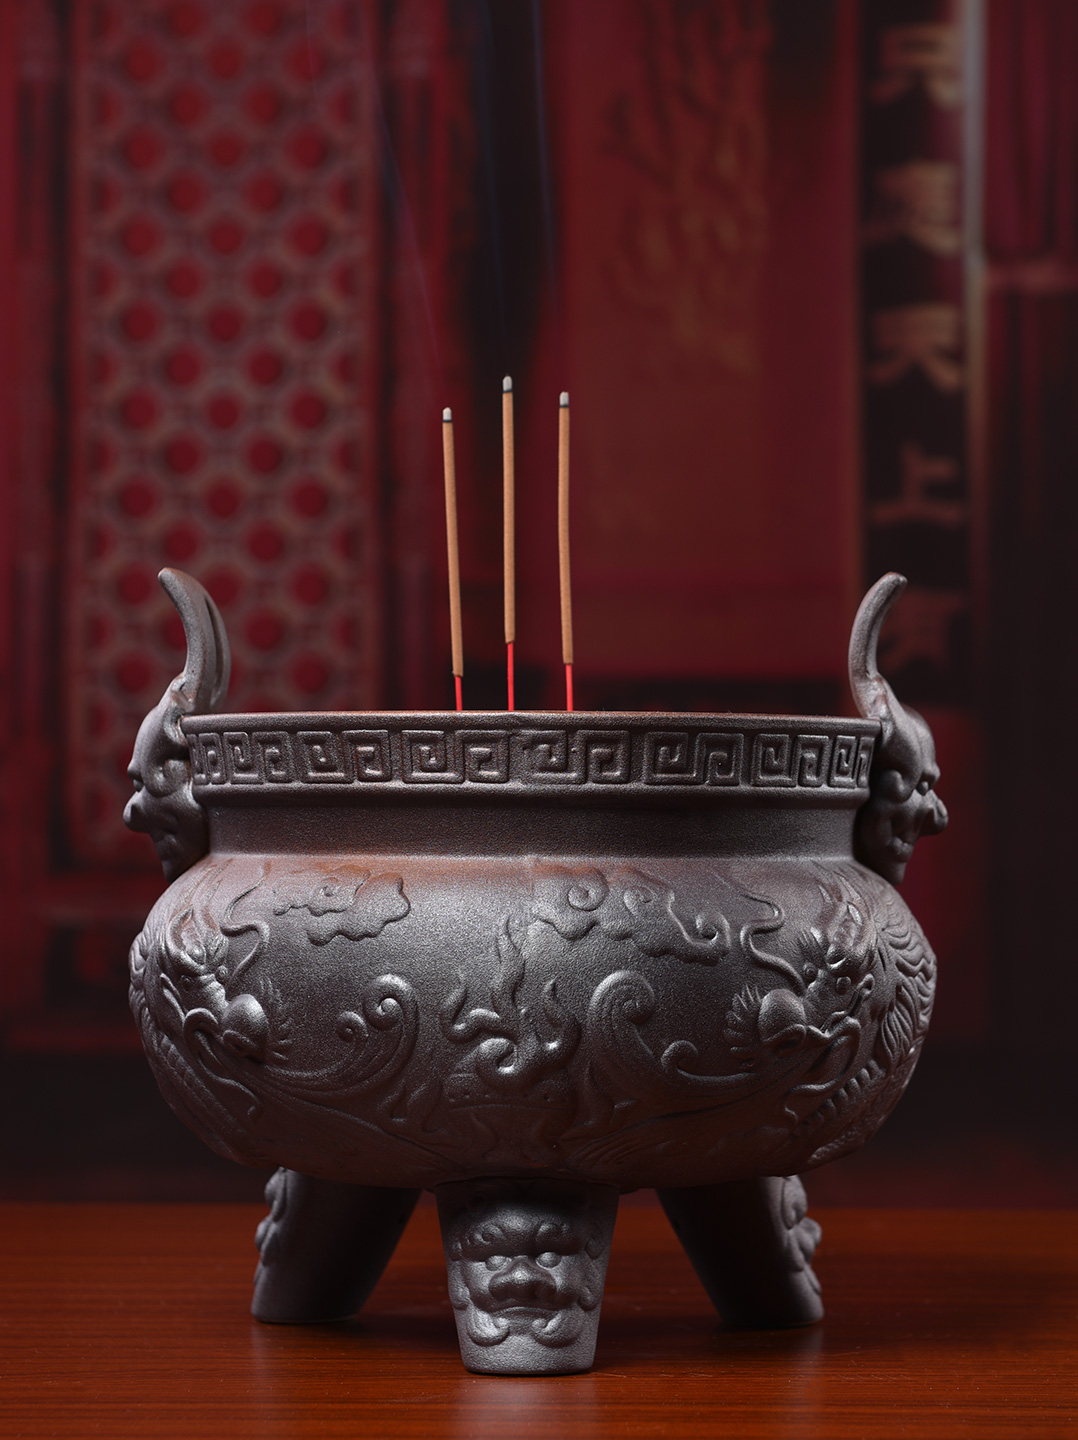 Yutang dai ceramic antique incense buner with three legs for buddhist worship indoor Buddha with supplies and furnishing articles